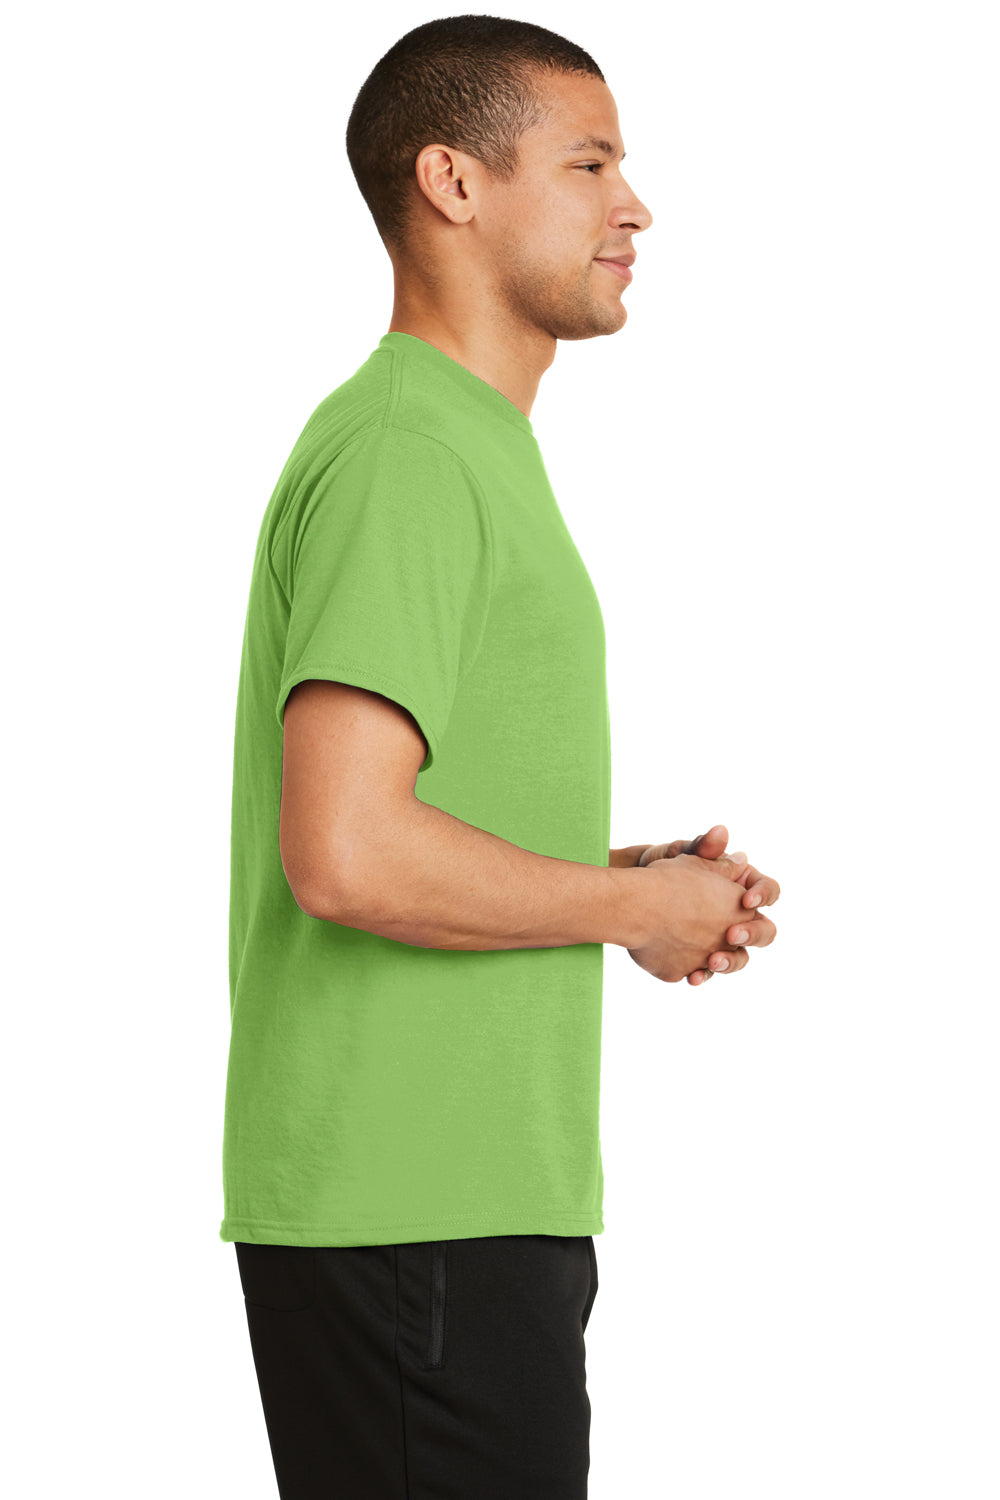 Port & Company PC381 Mens Dry Zone Performance Moisture Wicking Short Sleeve Crewneck T-Shirt Lime Green Side